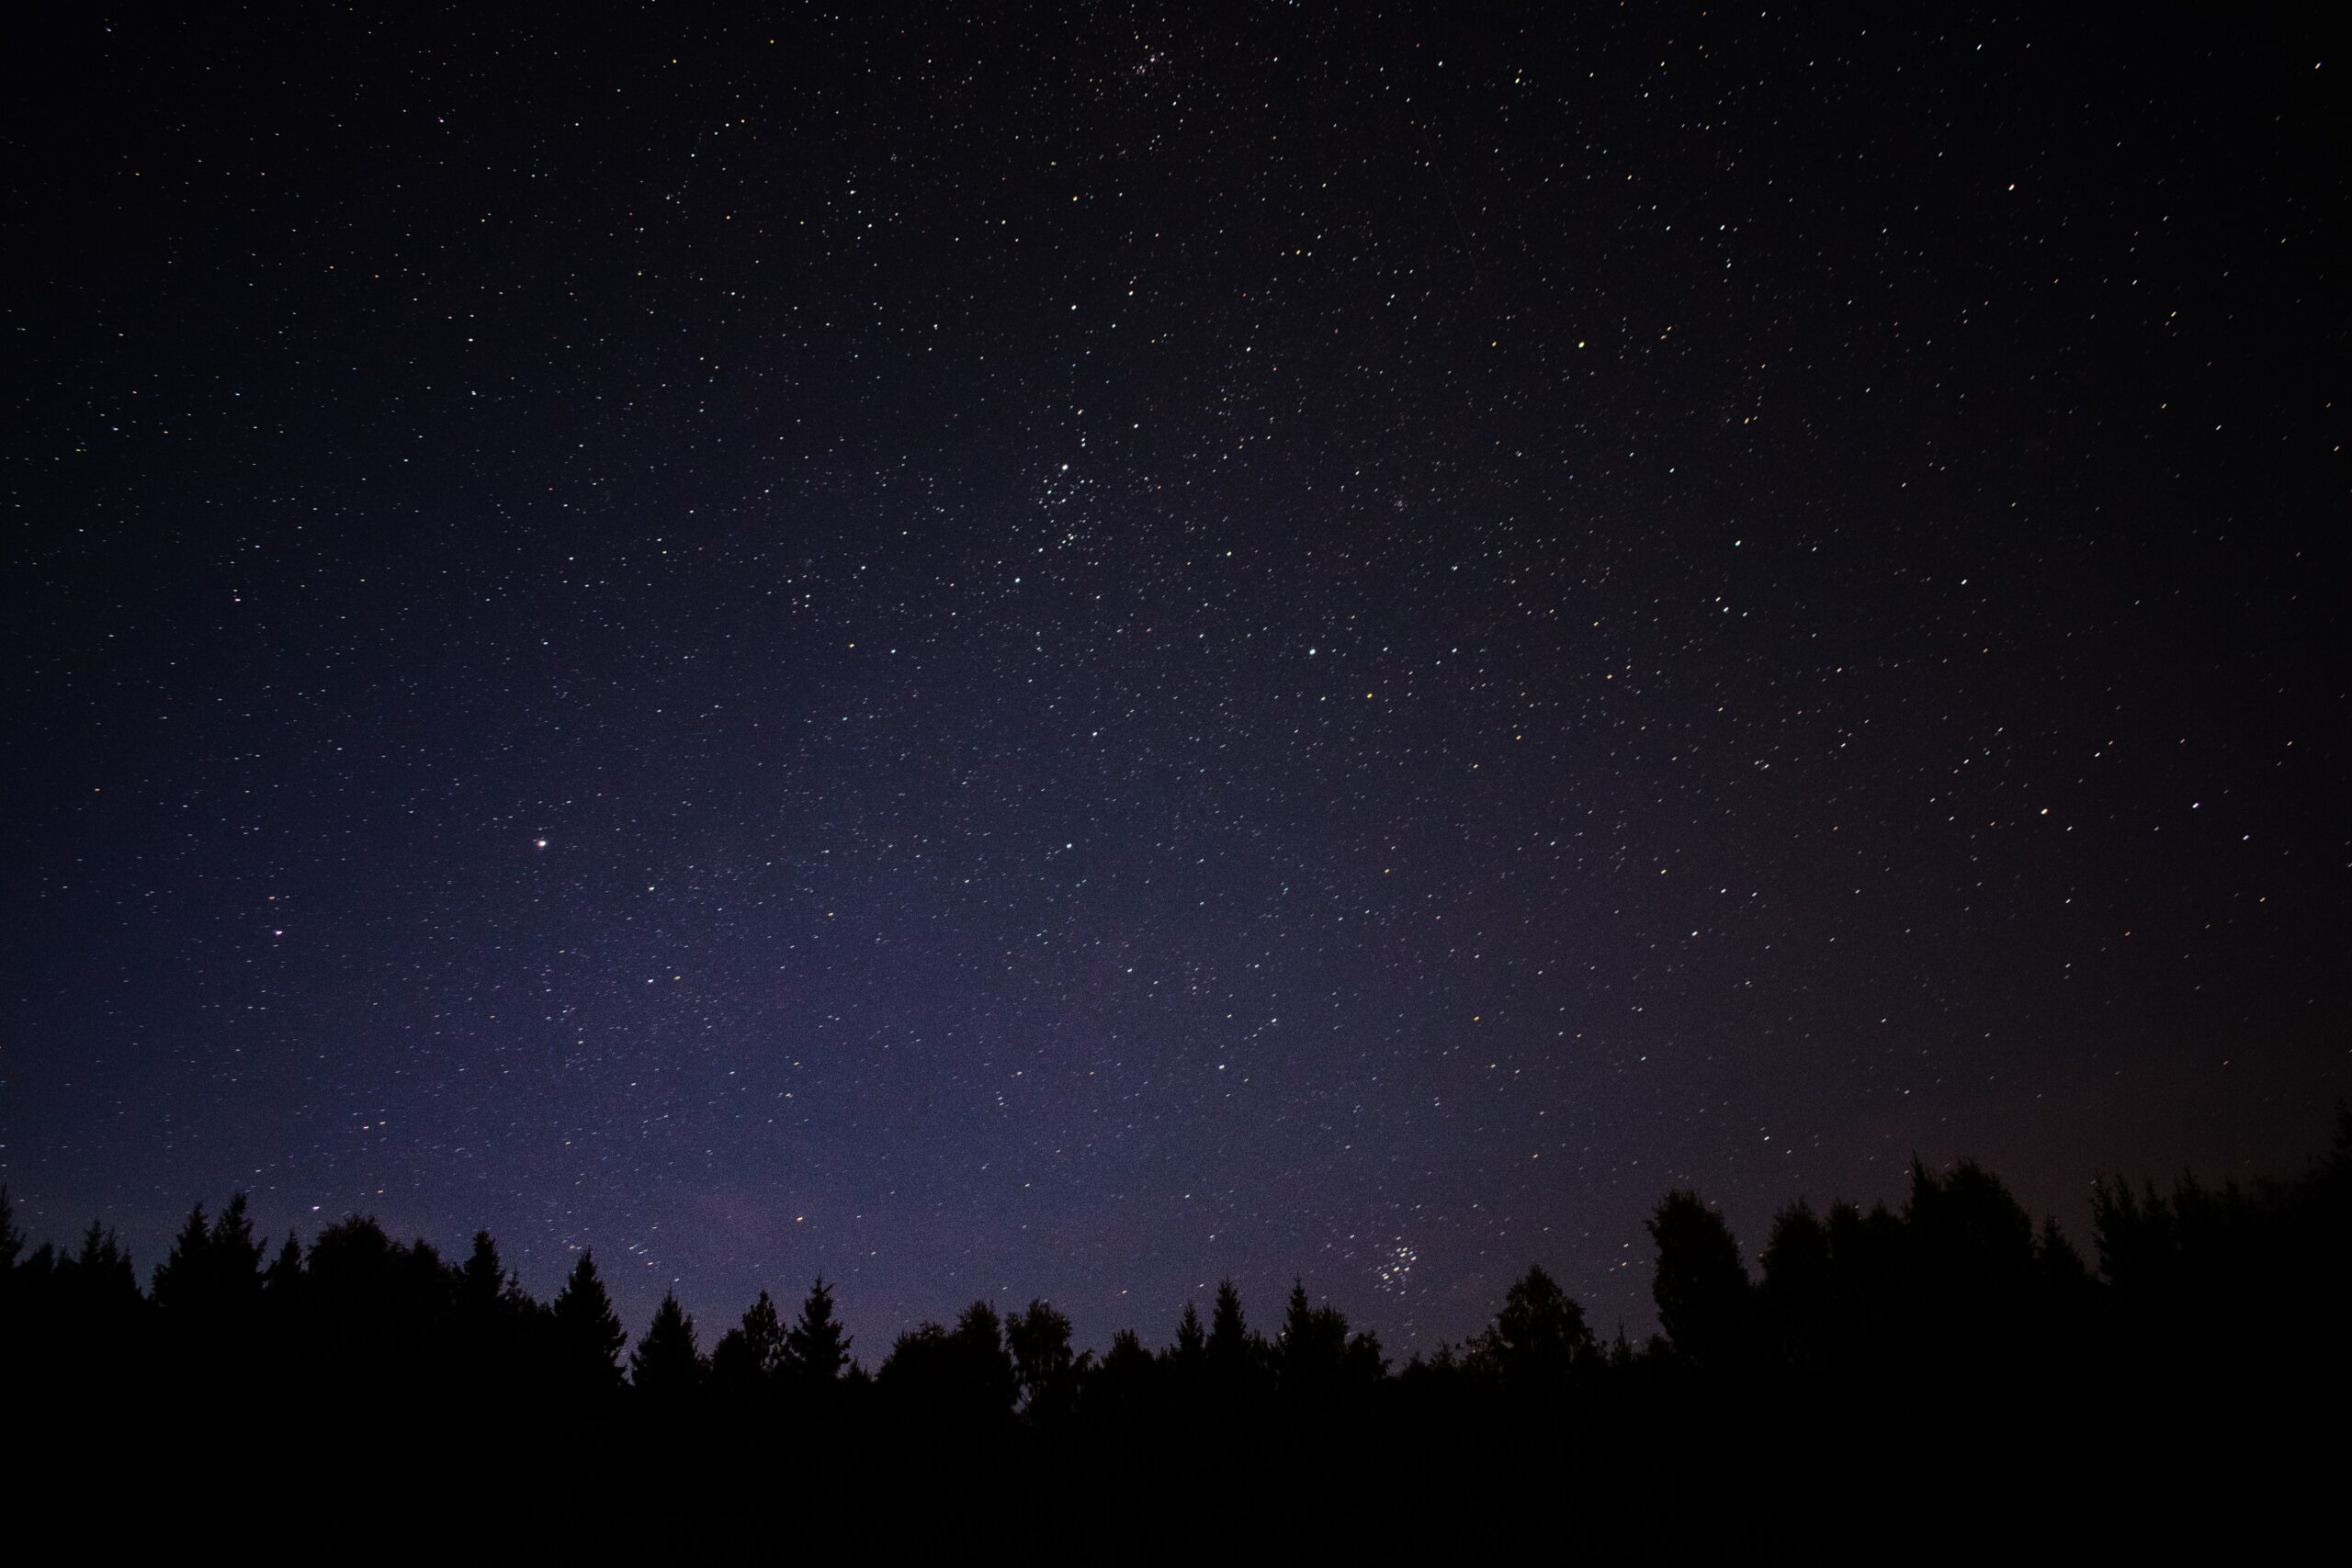 The star-studded dark night of Eryri above a forest tree line